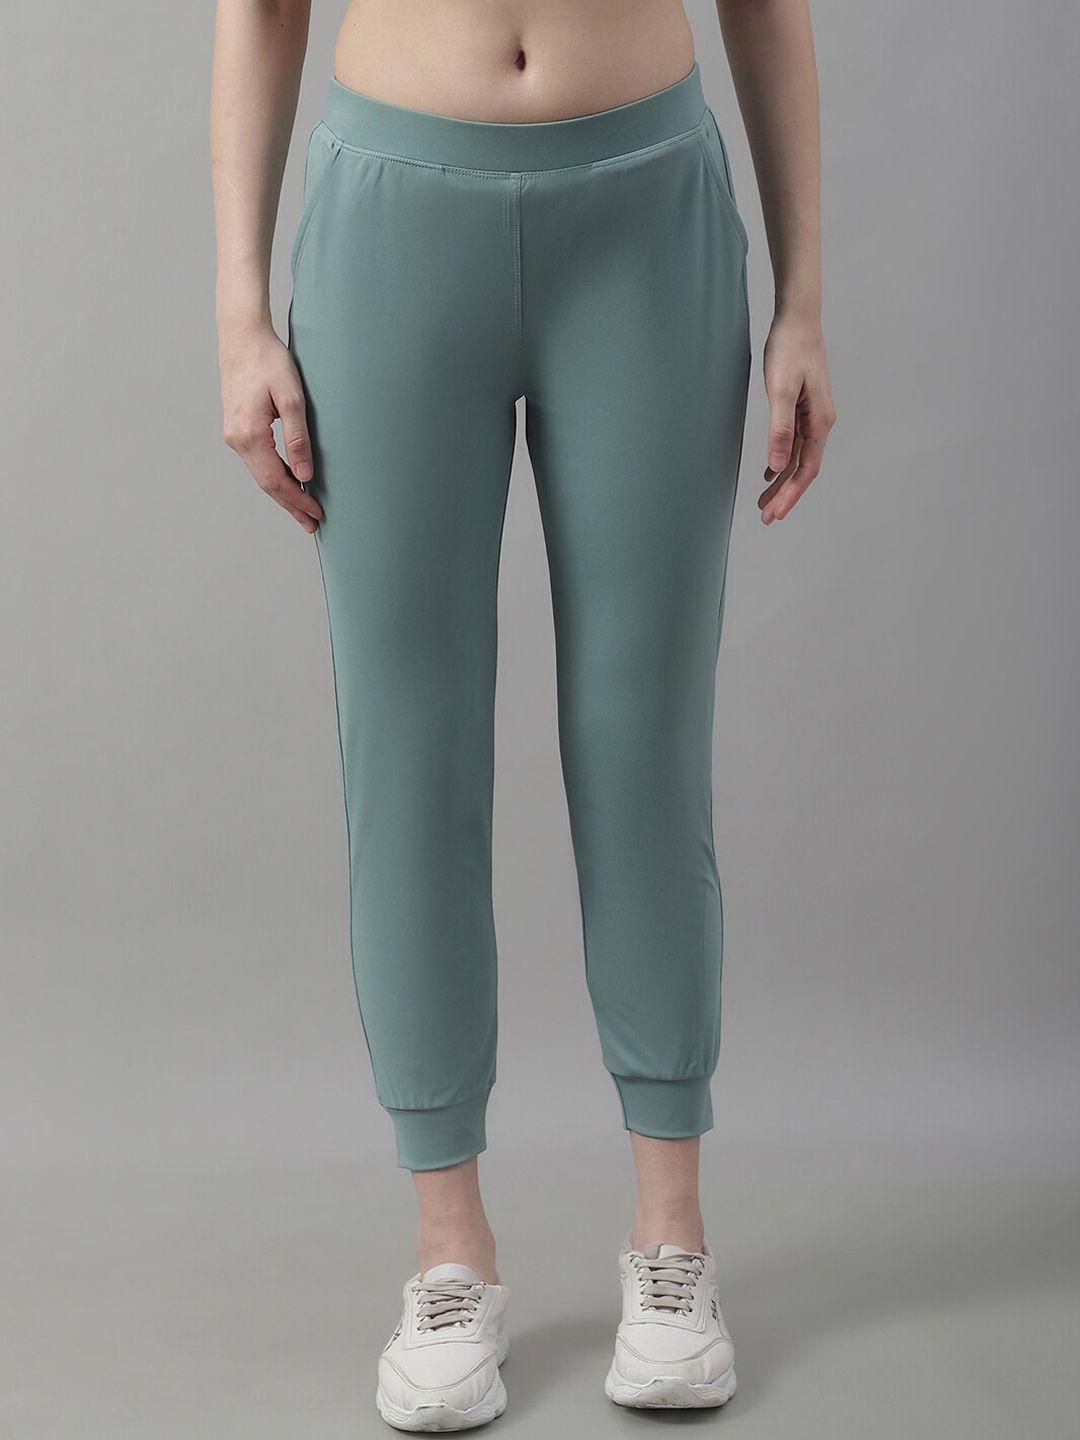 frempy mid-rise joggers